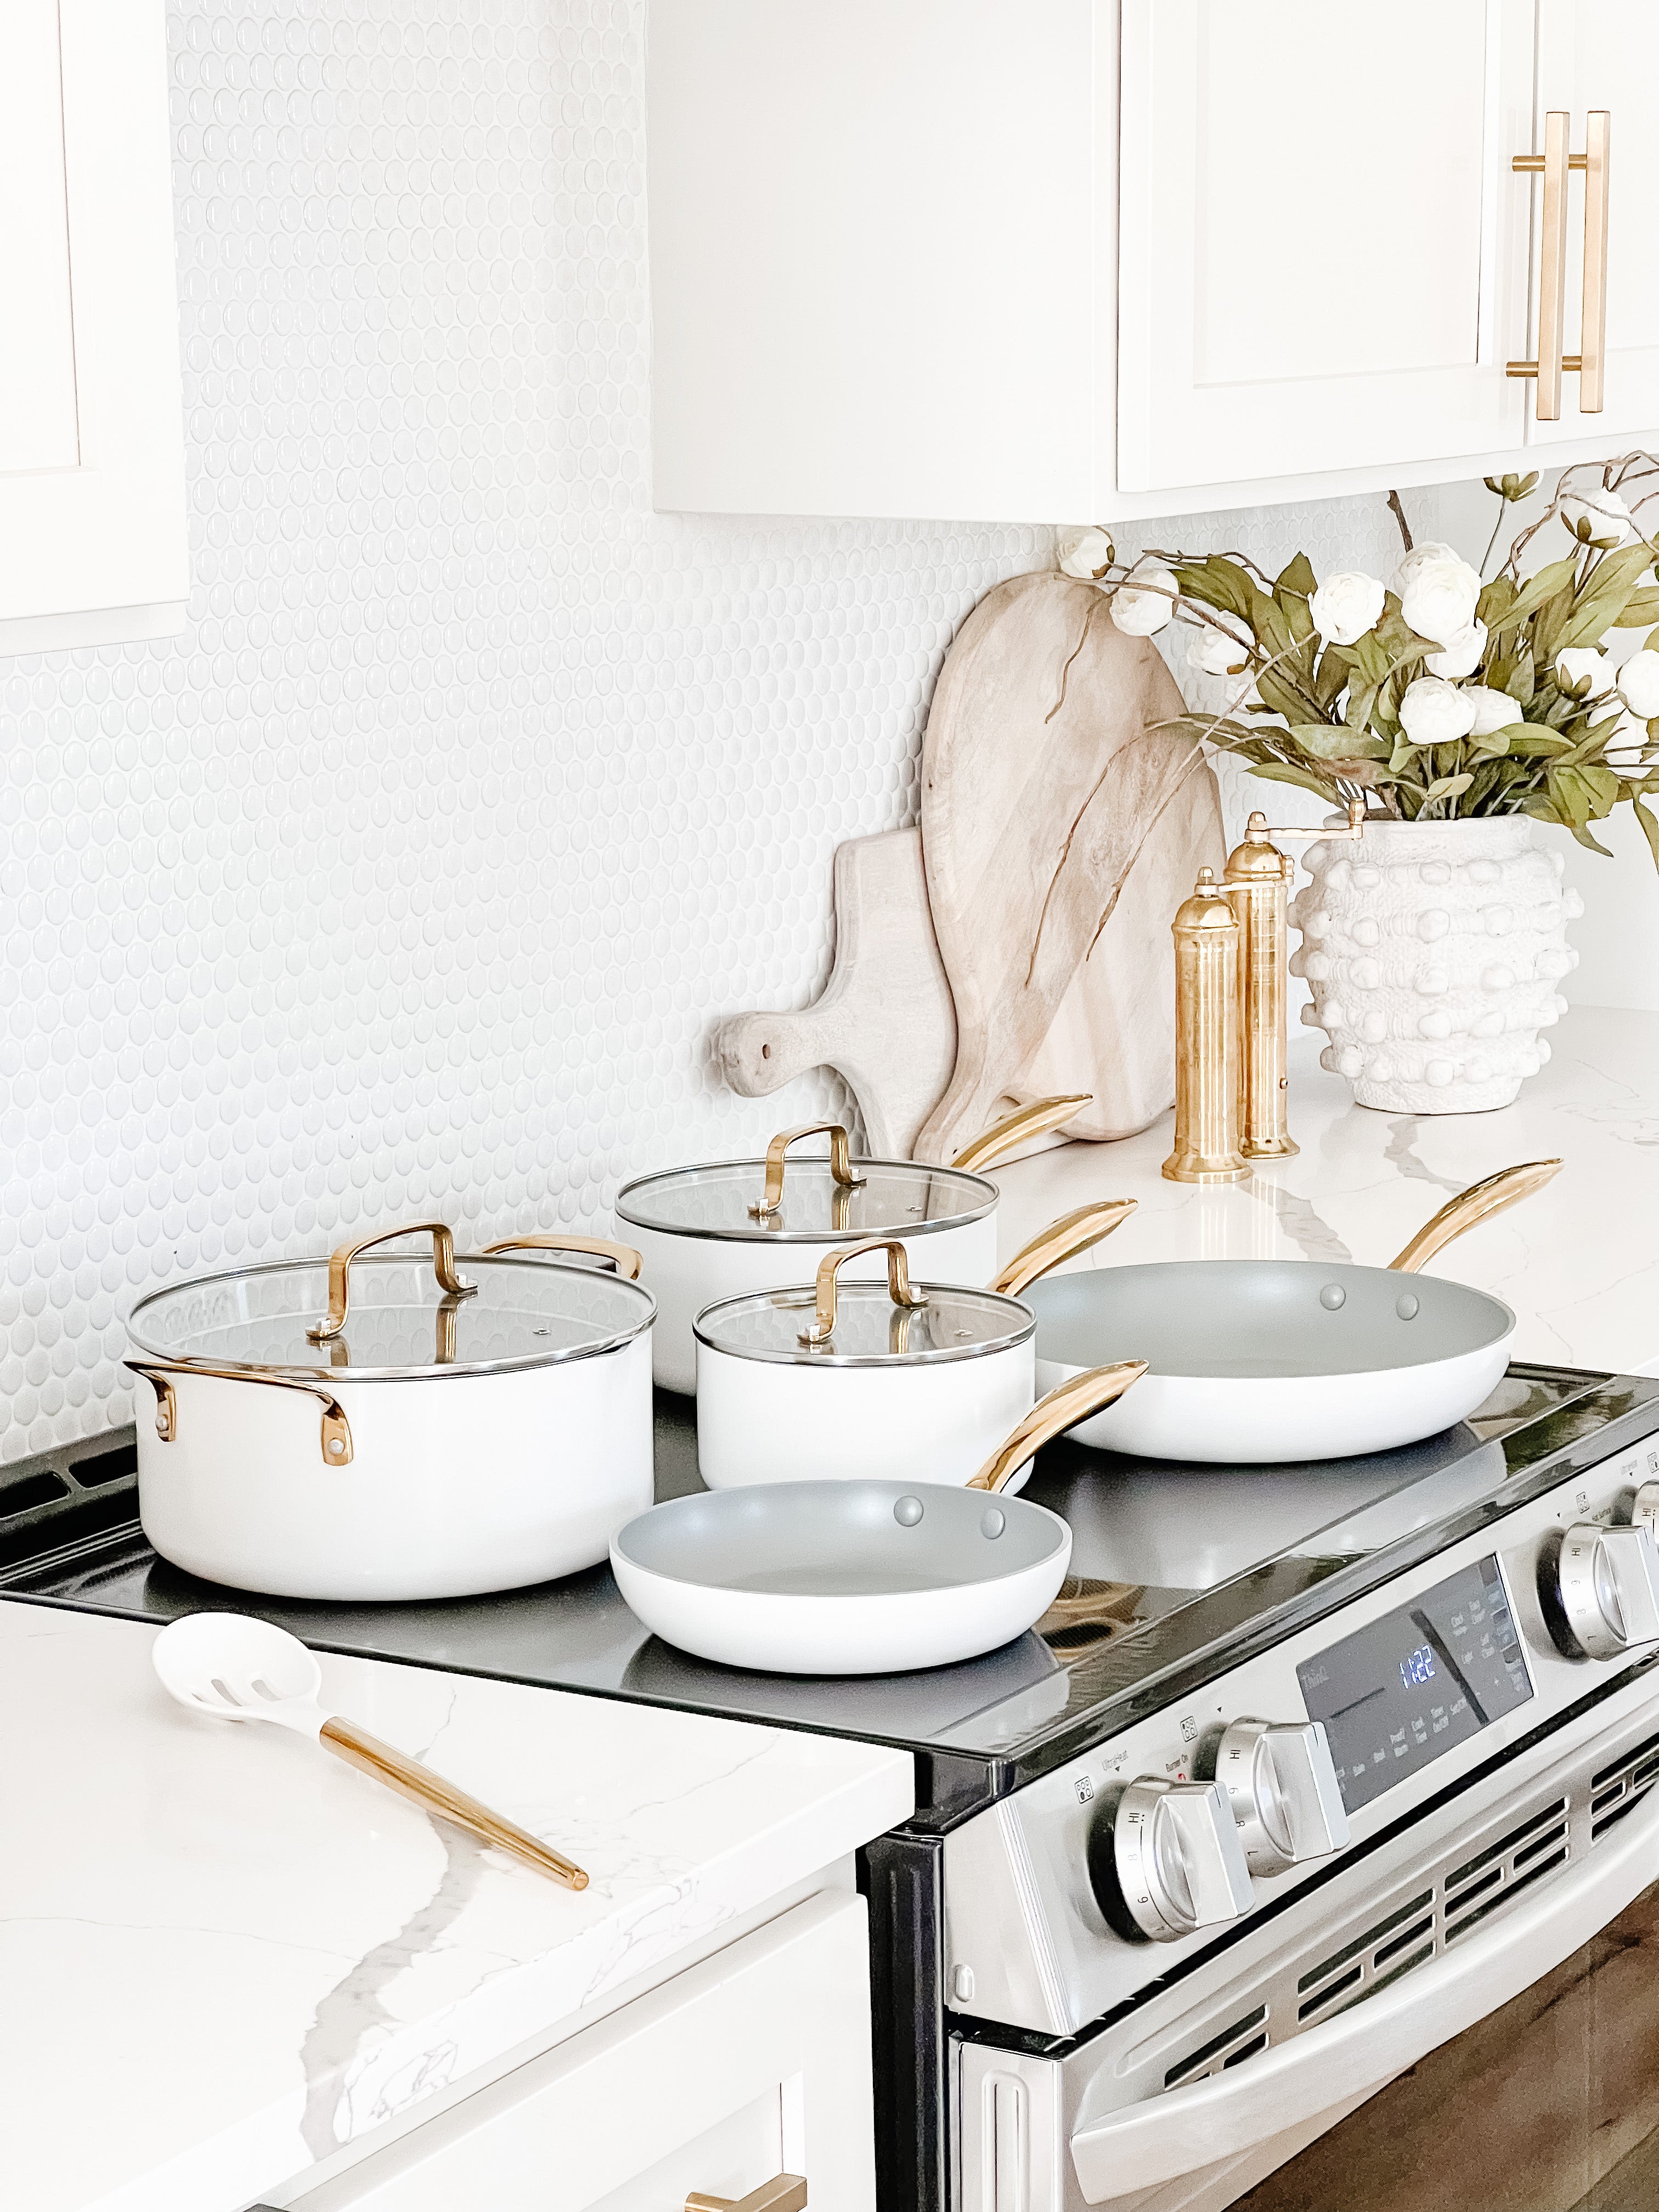  STYLED SETTINGS White Silicone and Gold Kitchen